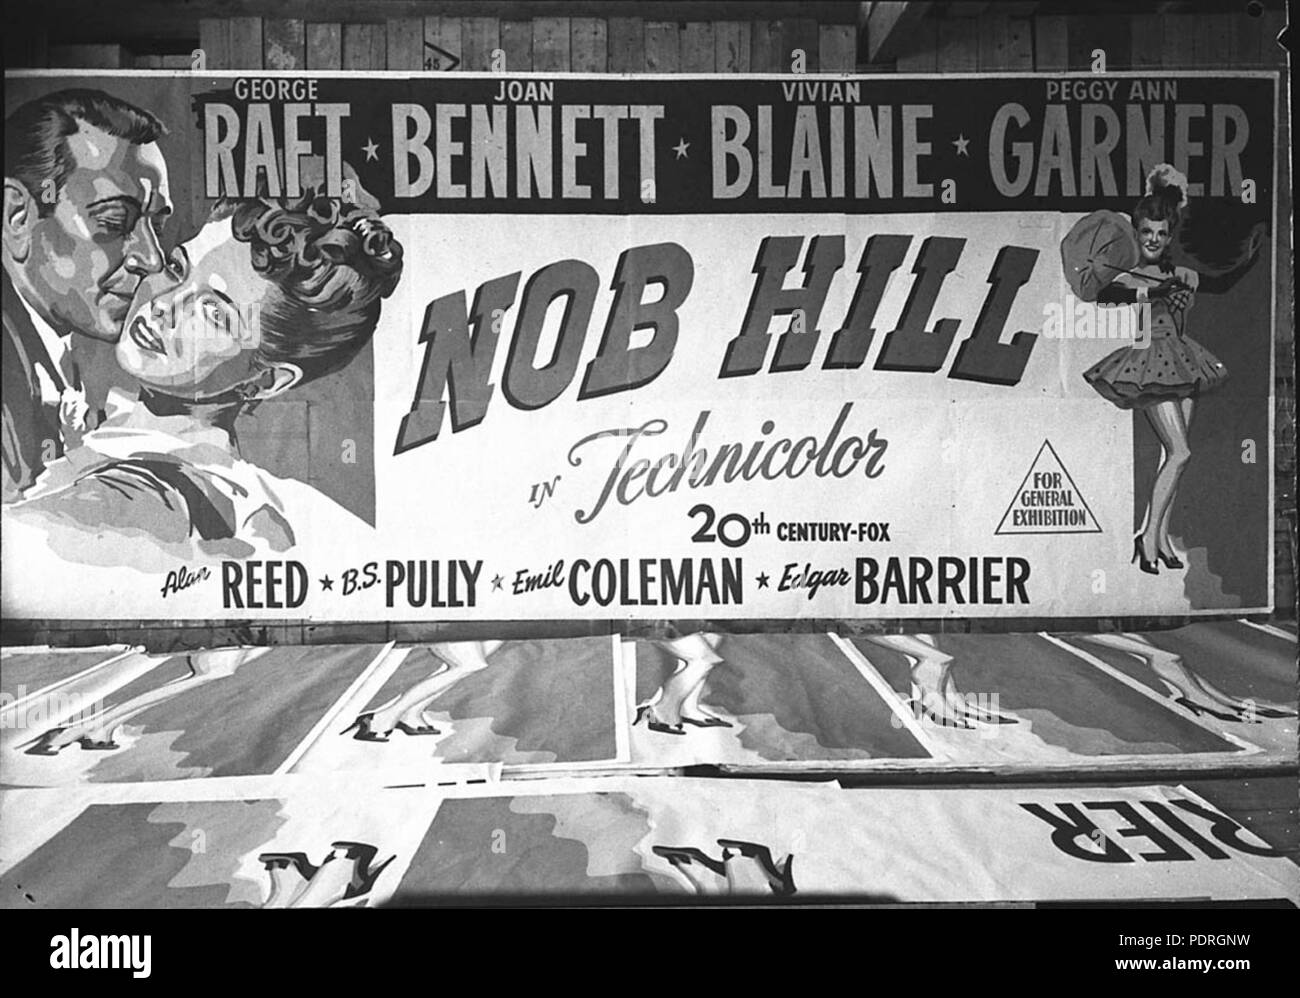 135 SLNSW 13495 Nob Hill poster with George Raft Joan Bennett Vivian Blaine Peggy Ann Garner Alan Reed BS Pully Emil Coleman and Edgar Barrier British Empire Films and Fox Films Stock Photo